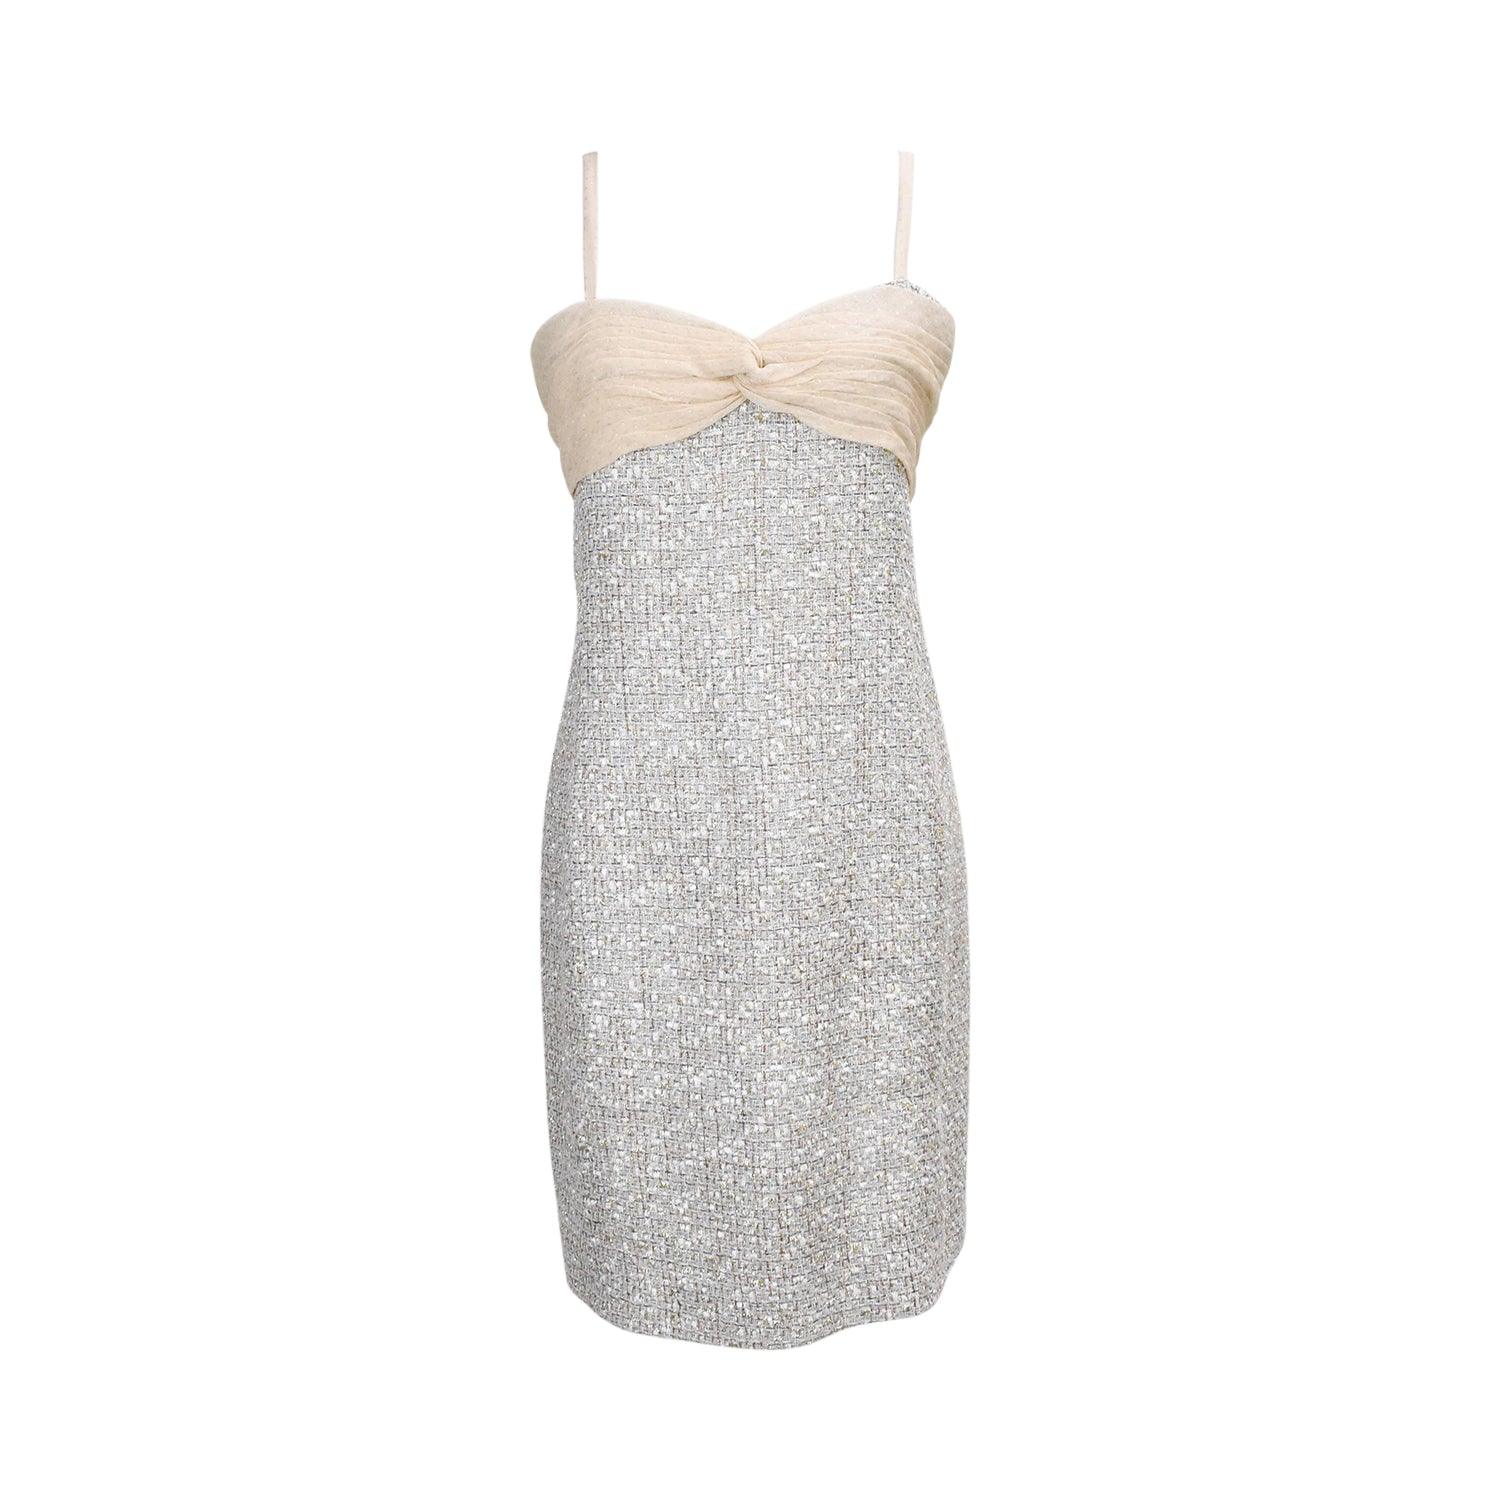 Chanel Dress - Women's 44 - Fashionably Yours